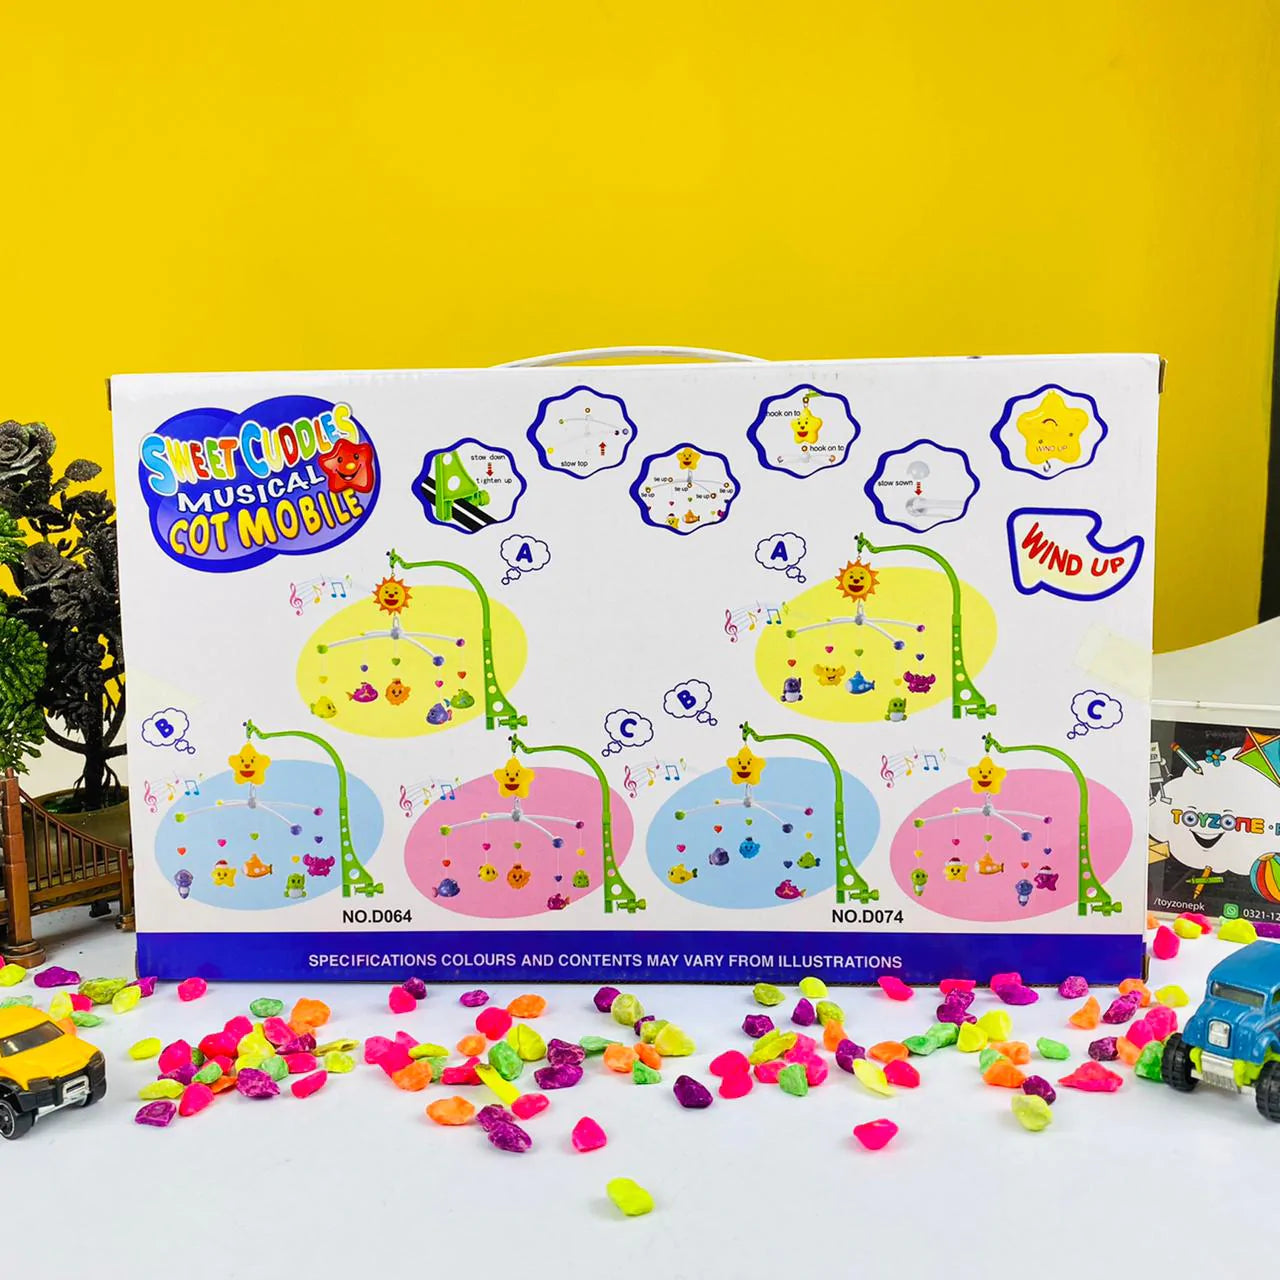 Sweet Cuddles Musical Cot Mobile with Harmonious Music Toy In Pakistan